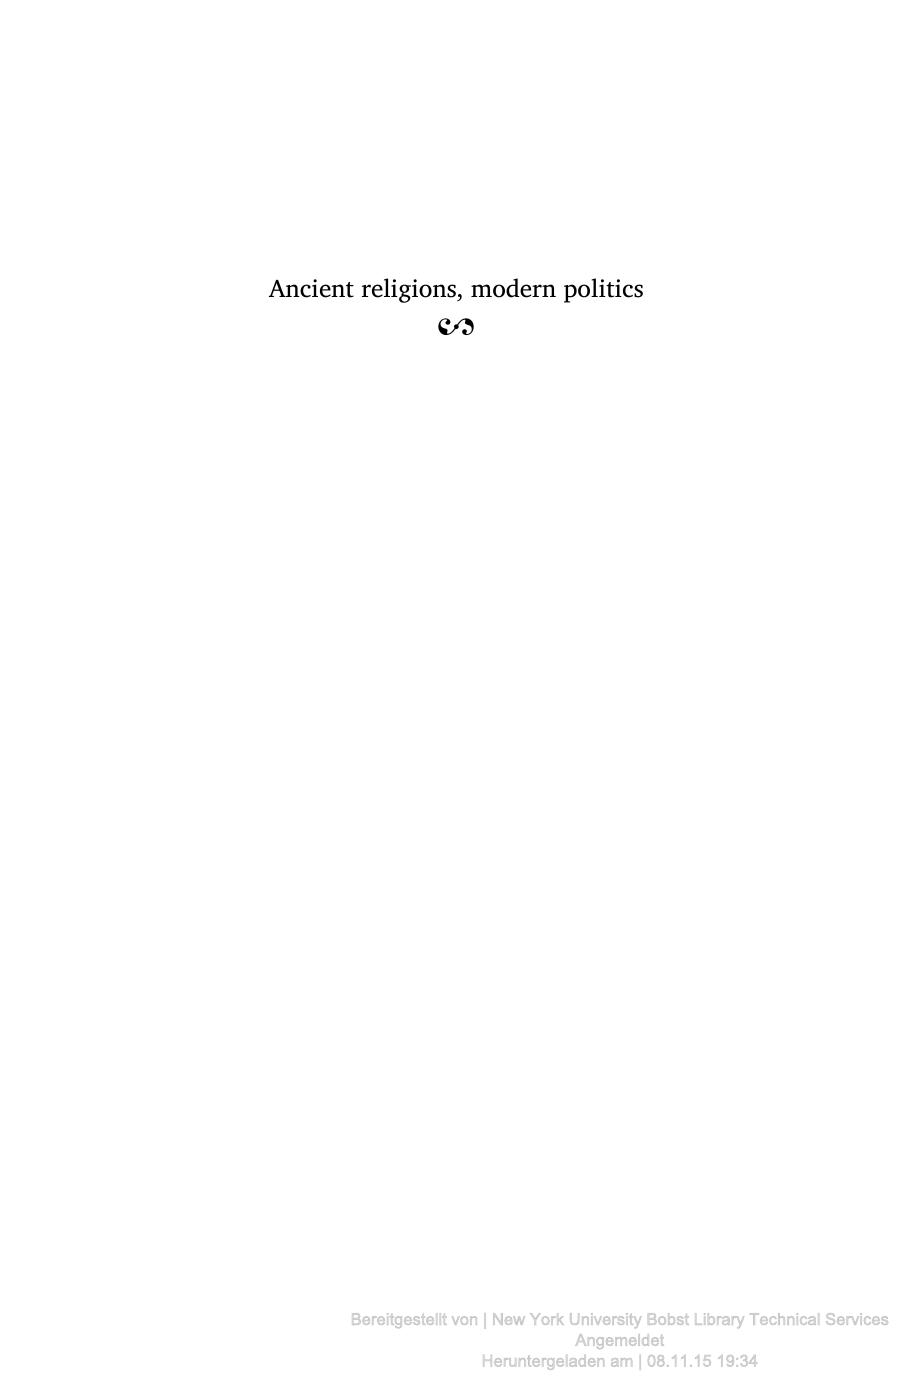 Ancient Religions, Modern Politics: The Islamic Case in Comparative Perspective by Michael Cook